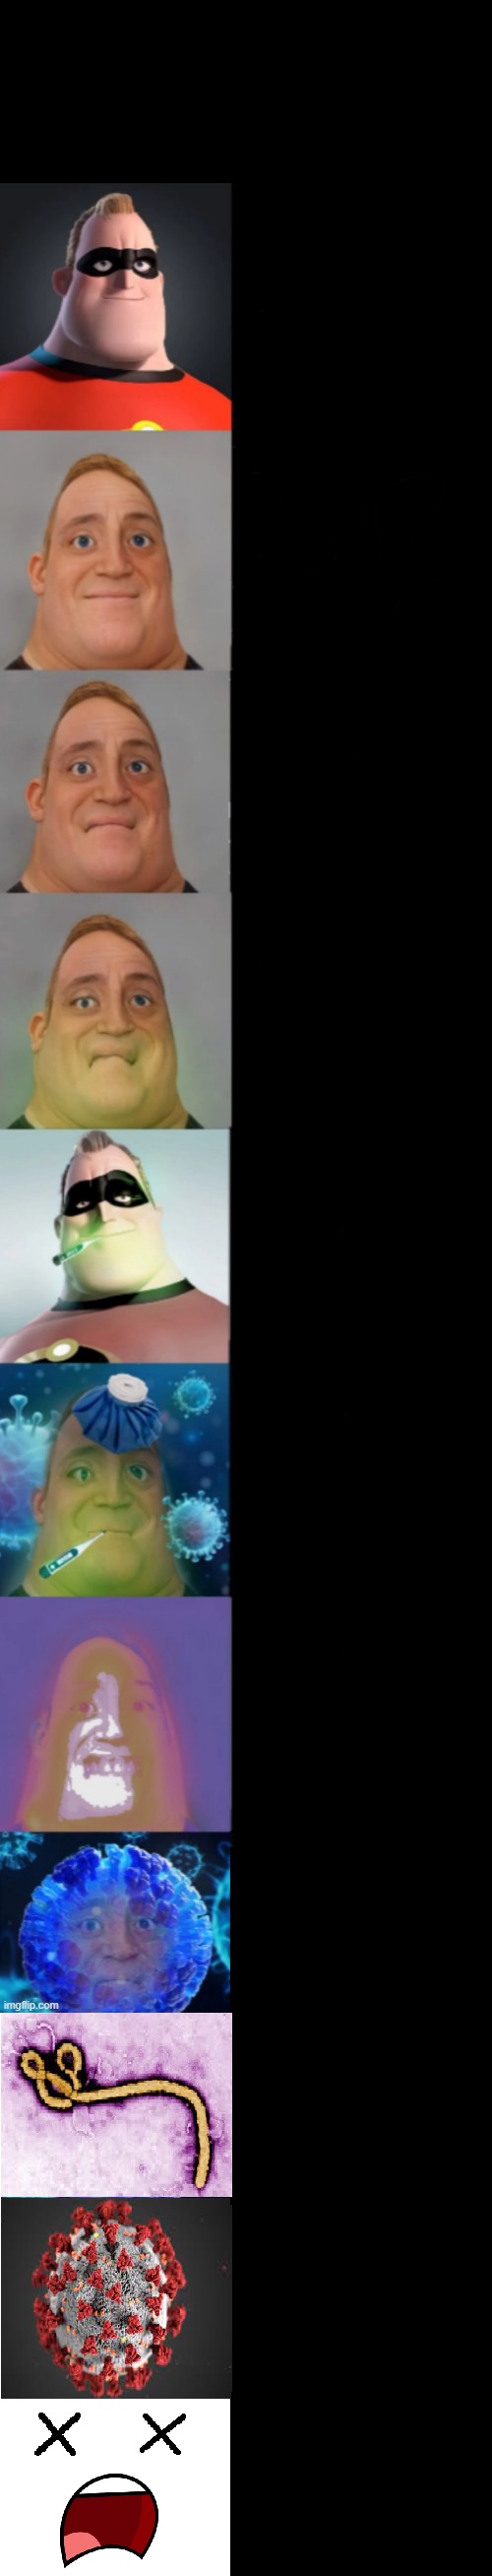 High Quality mr incredible becoming sick (extended) Blank Meme Template